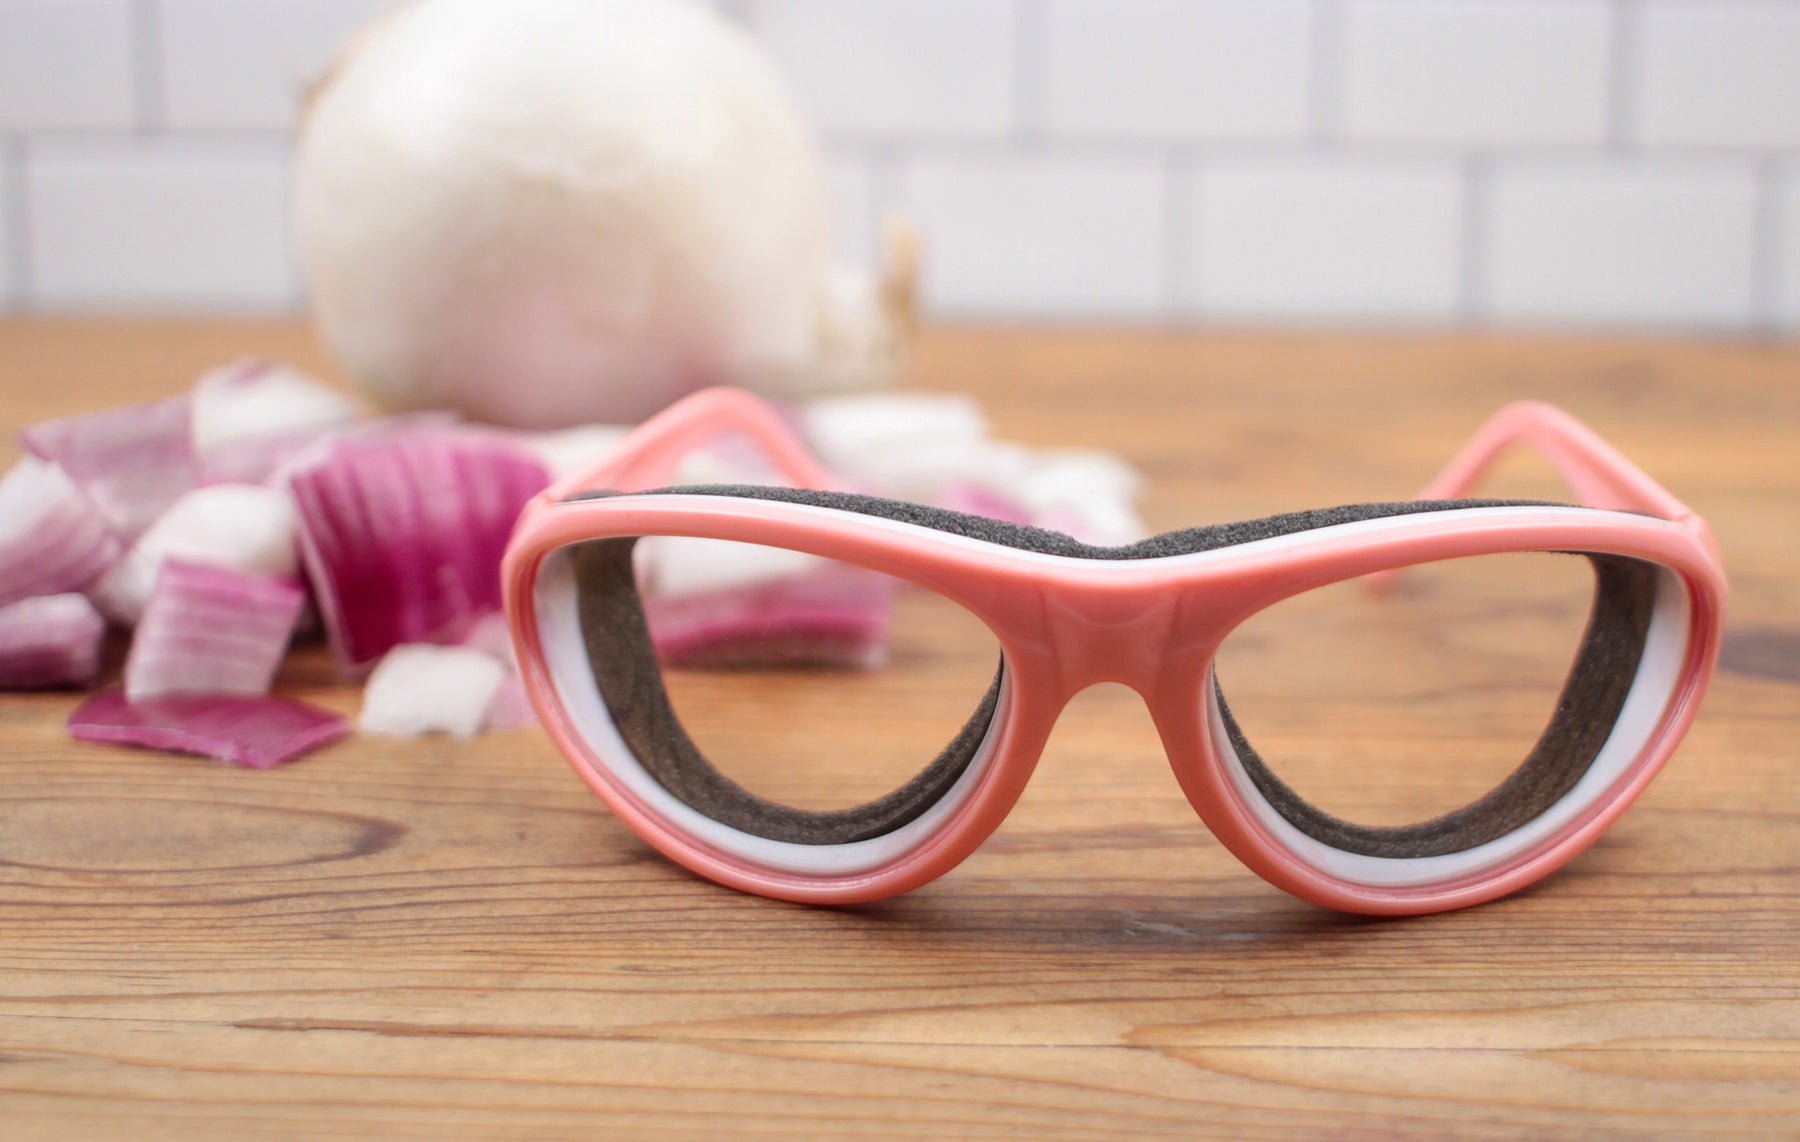 Rsvp Pink Onion Goggles